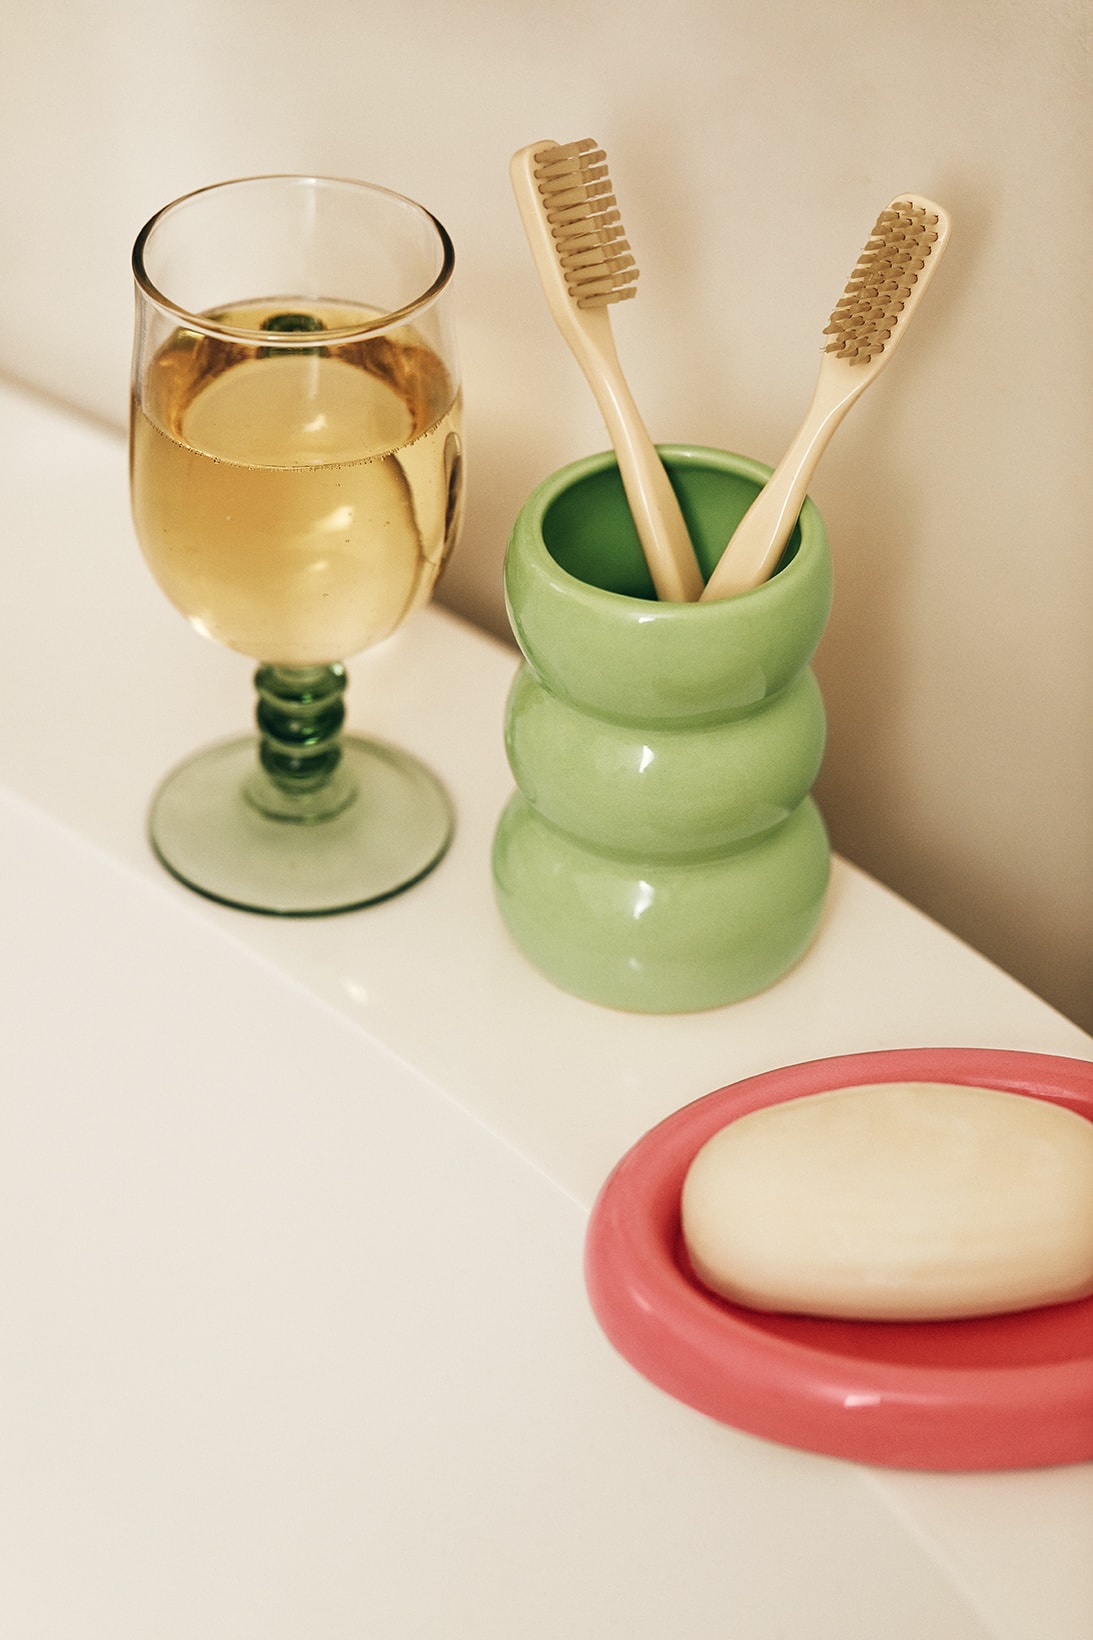 sleeper home homeware decor collection ceramic plate soap dish toothbrush holder cup glass green pink